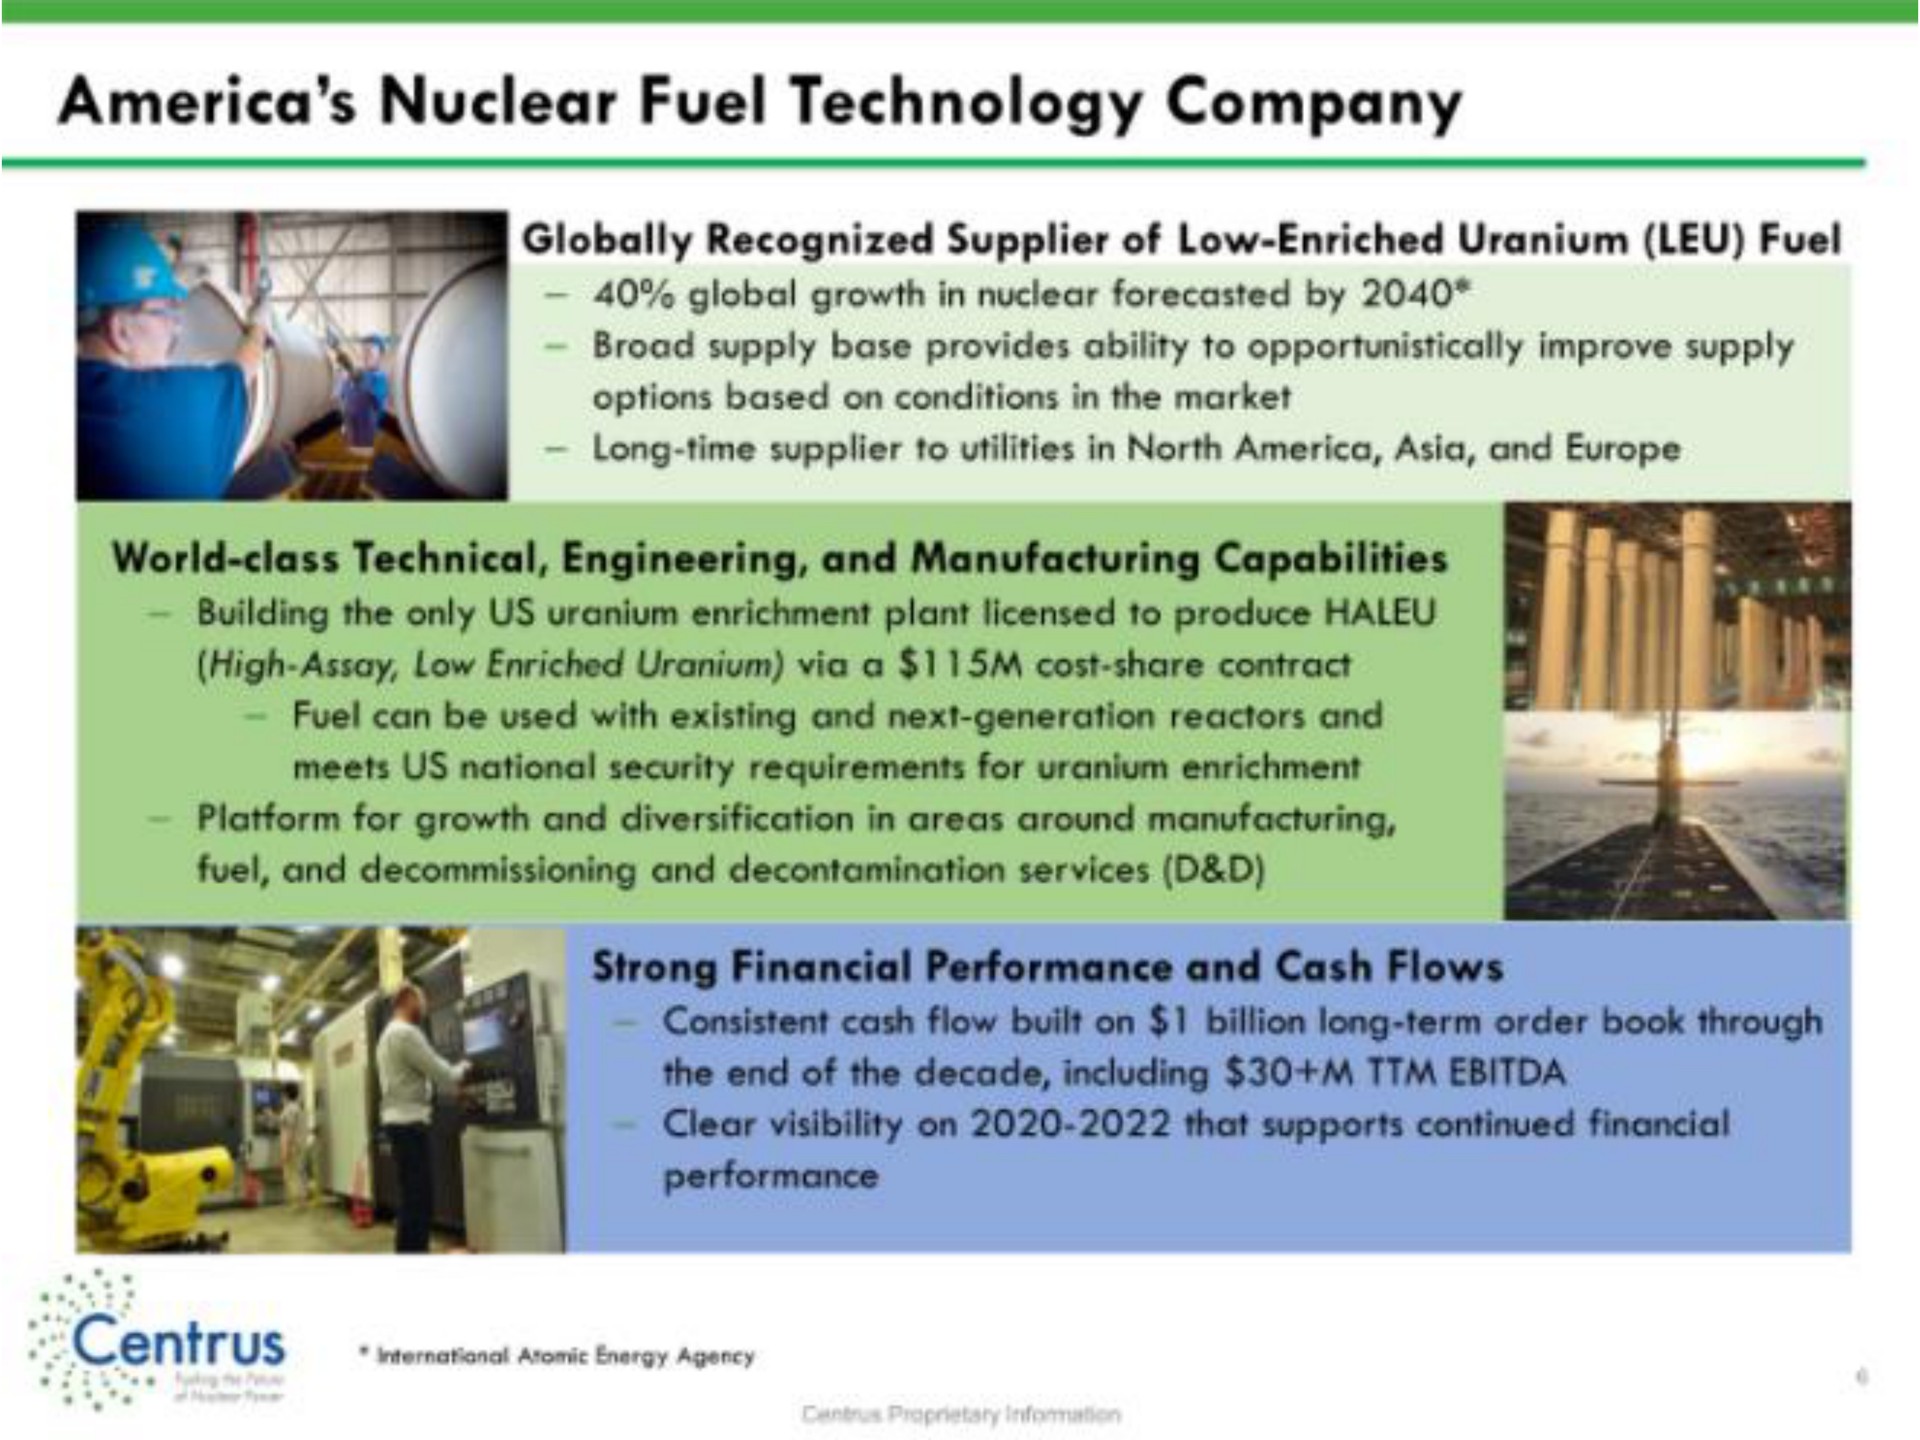 nuclear fuel technology company globally recognized supplier of low enriched uranium leu fuel world class technical engineering and manufacturing capabilities building the only us uranium enrichment plant licensed to produce high assay low enriched uranium via a cost share contract platform for growth and diversification in areas around manufacturing and cash flows strong financial performance order book through cash flow built on billion long term consistent the end of the decade including clear visibility on that supports continued financial performance | Centrus